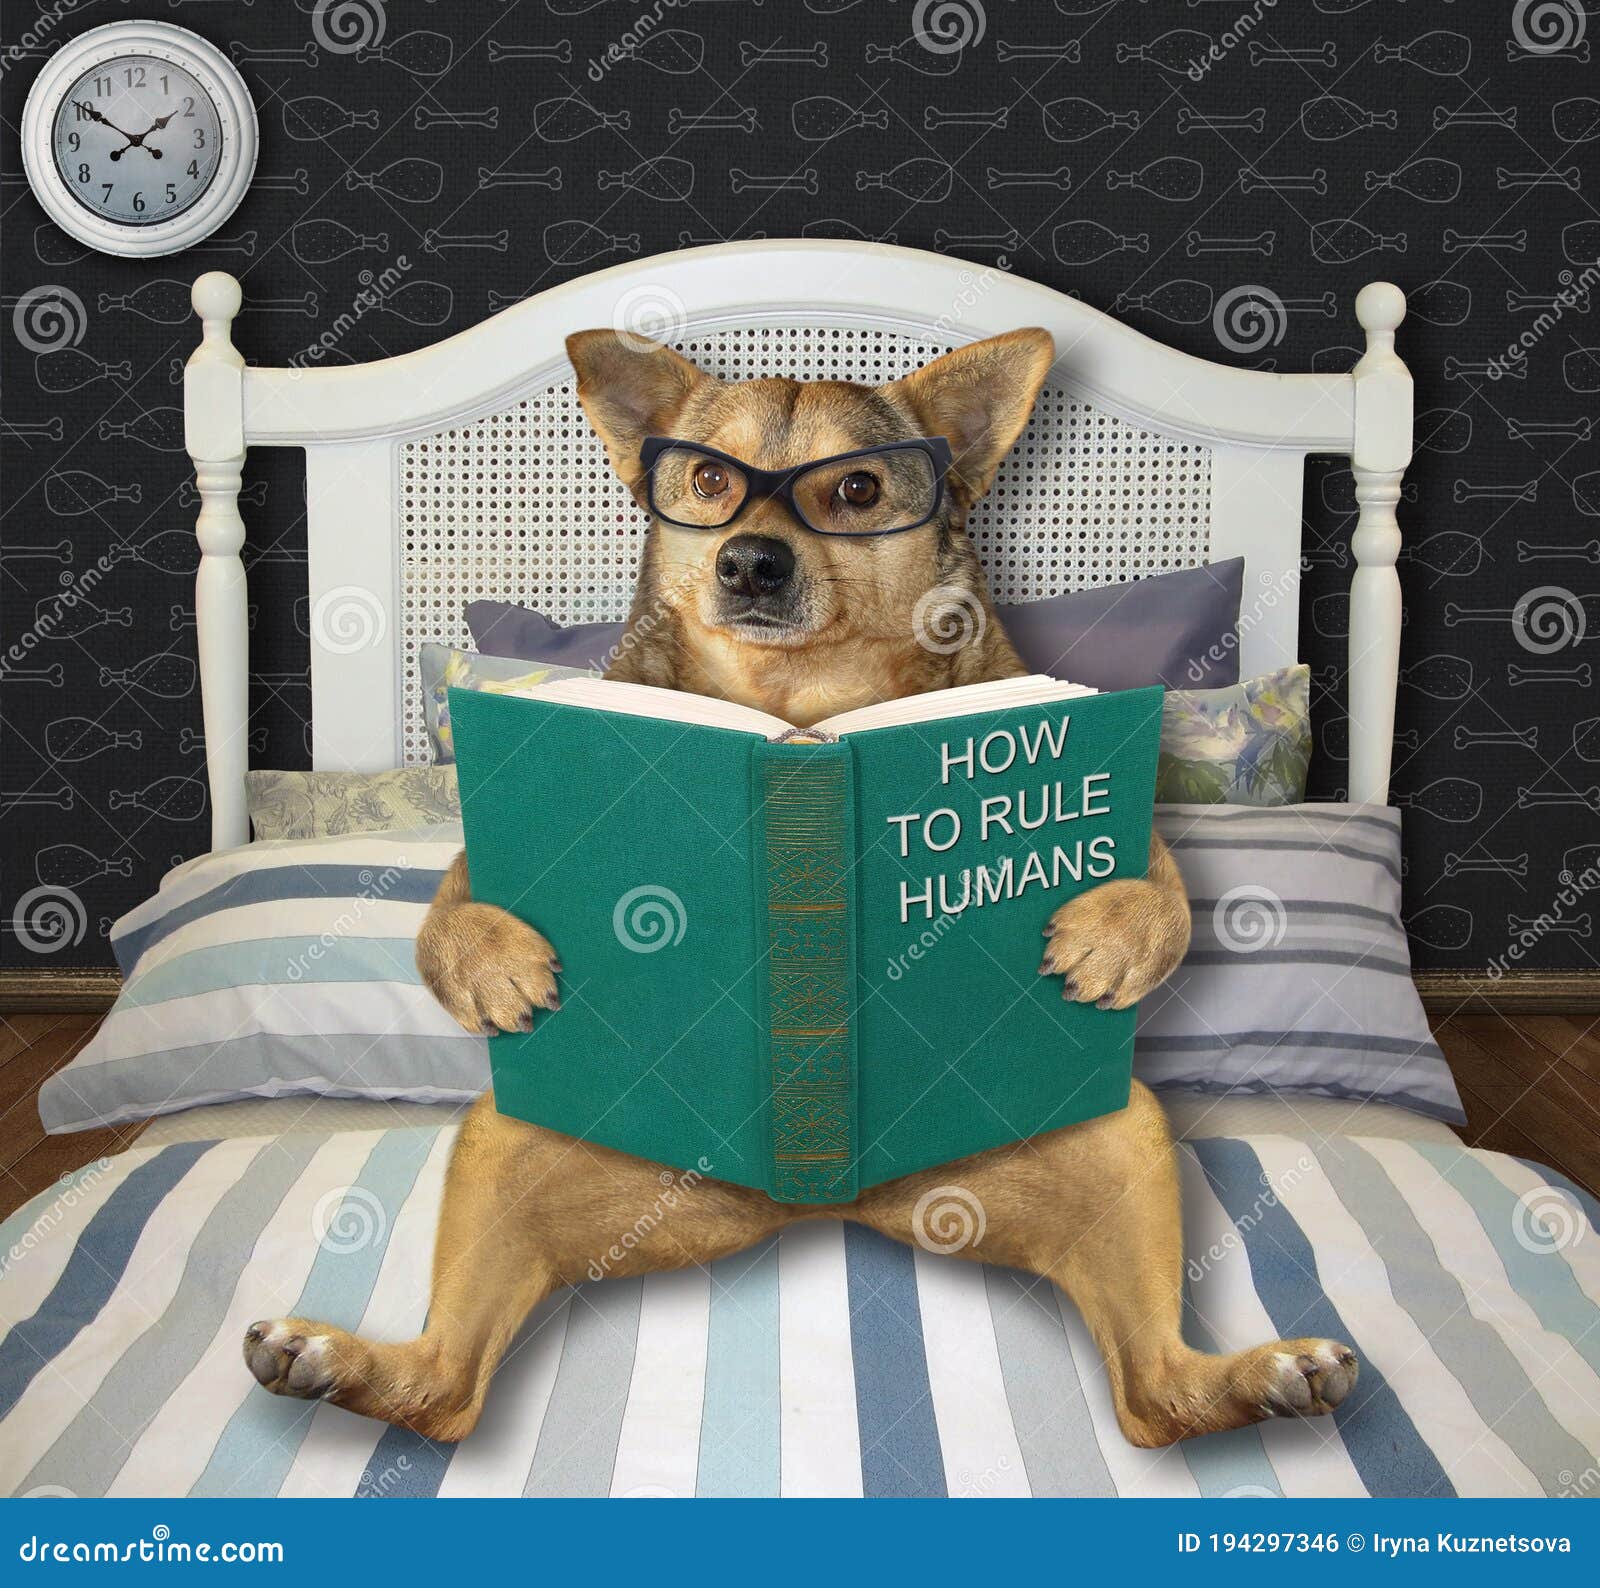 Dog Reading Funny Book in Bed Stock Photo - Image of rest, funny: 194297346